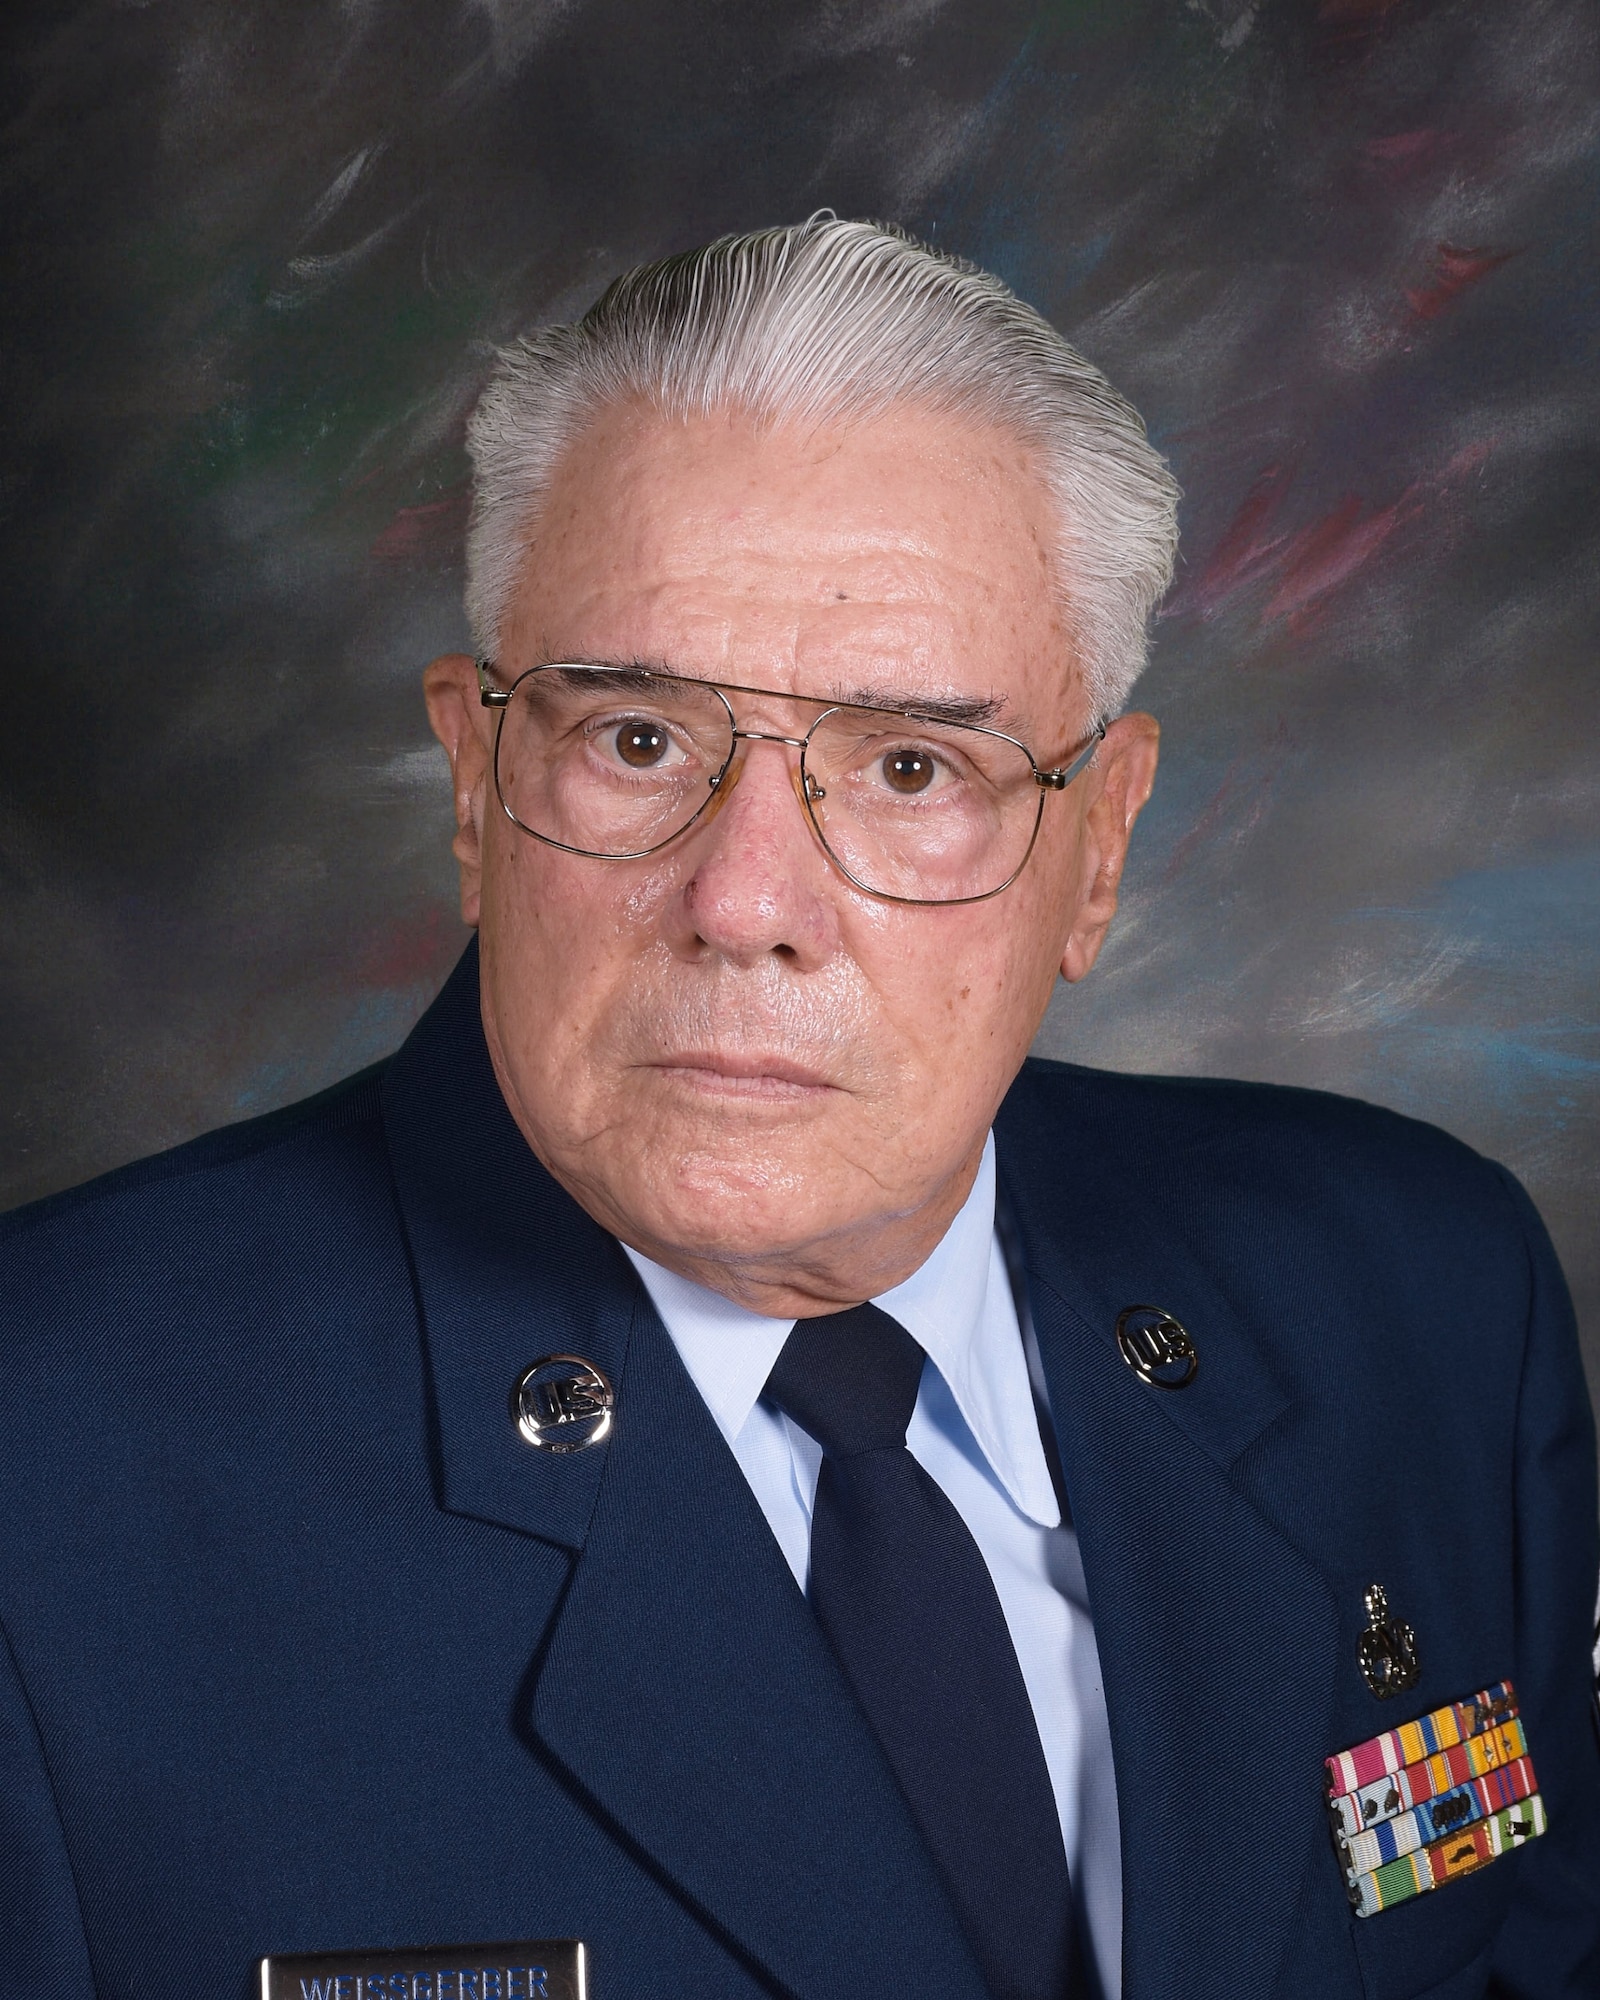 Retired Senior Master Sgt. David Weissgerber, aerospace science instructor, Air Force Junior ROTC Unit JA-932, Kadena High School, Okinawa, Japan, will be retiring at the end of the 2021-2022 school year after a 35-year career as an AFJROTC instructor, and this on top a distinguished 23-year active duty military career.